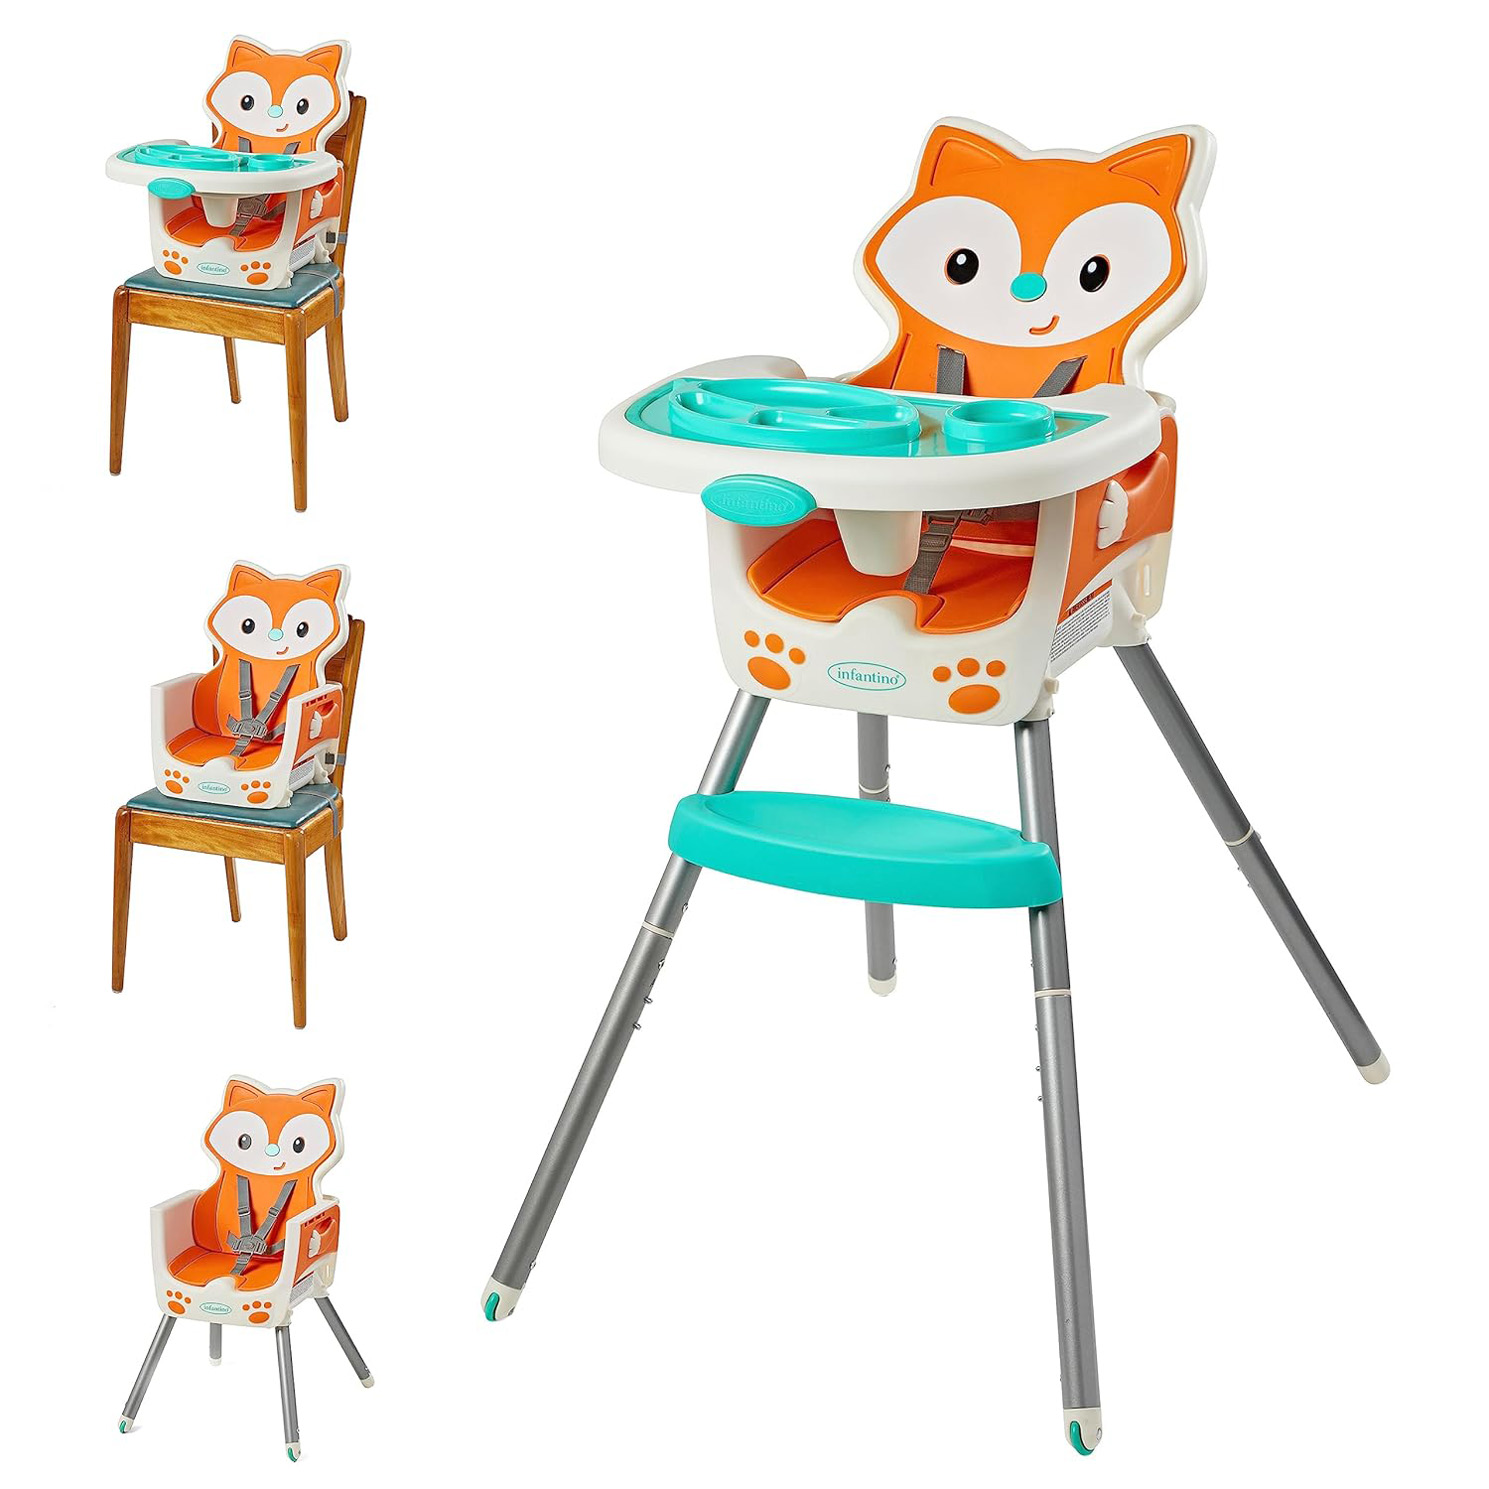 Infantino Grow-With-Me 4-in-1 Convertible High Chair, in a Fox-Themed Design